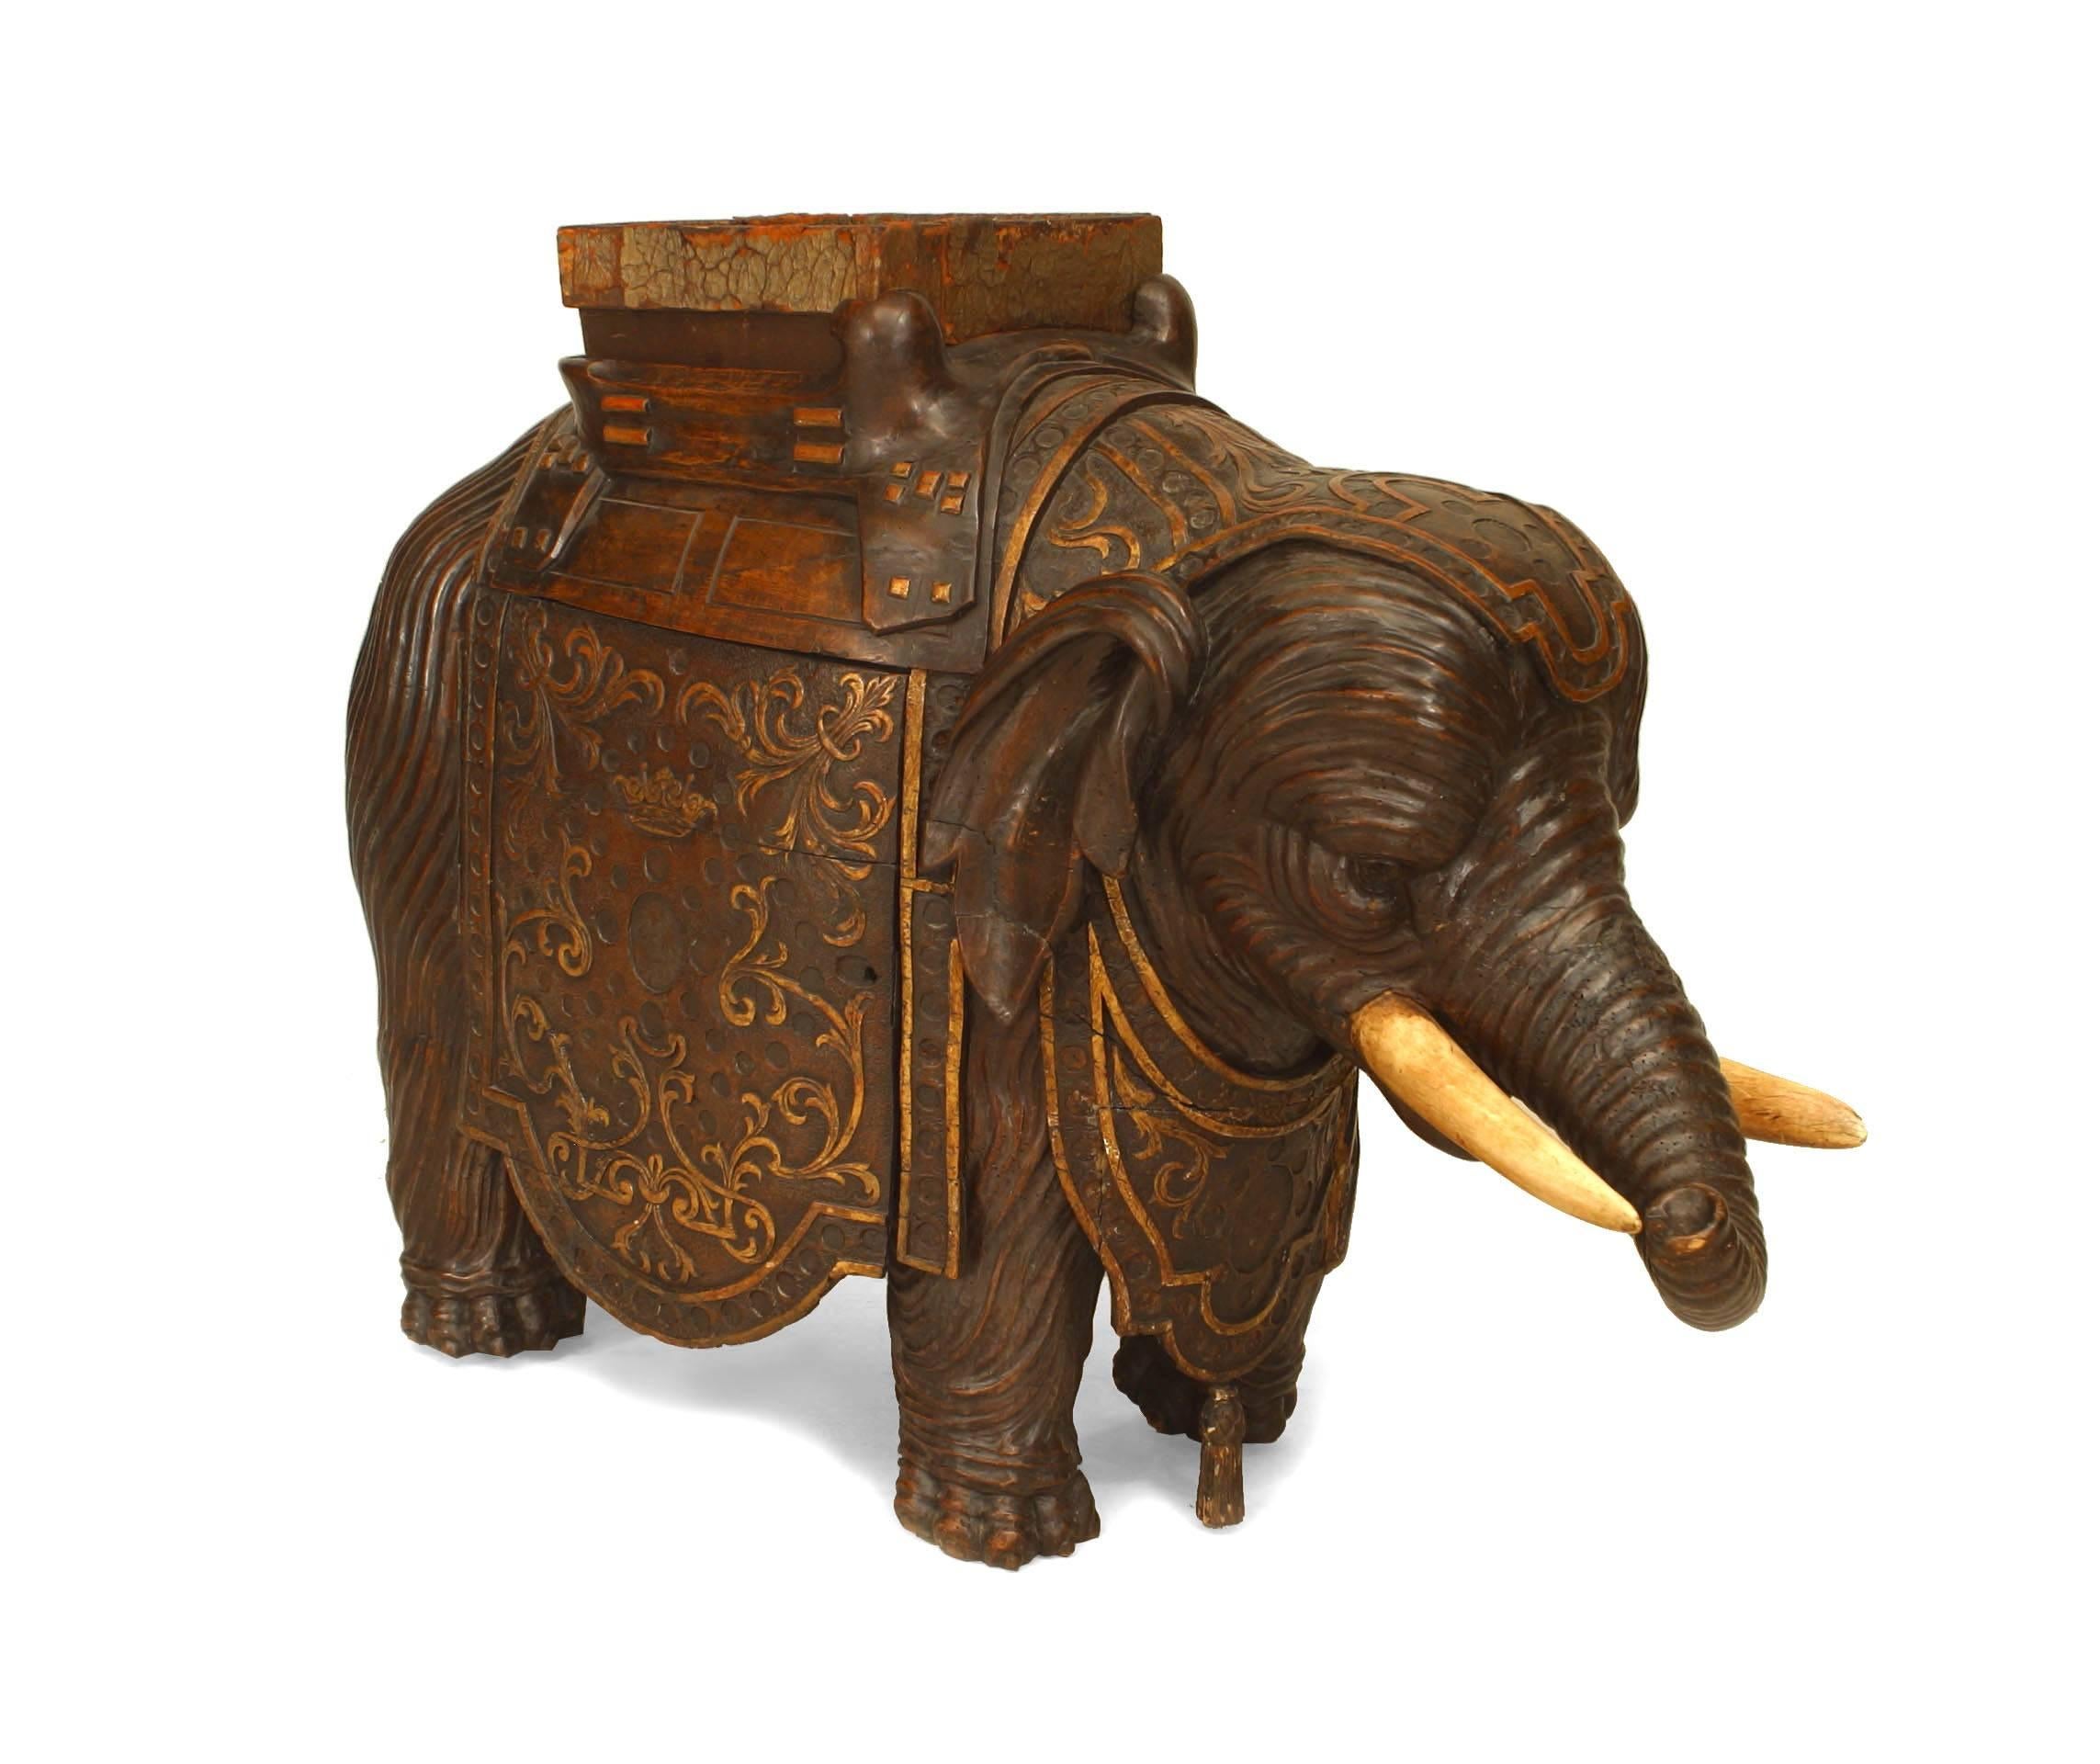 Anglo-Indian Walnut figure of an elephant dating to the English Regency period of the nineteenth century. Enshrouded in a decorative garb relief, the figure supports a square leather insert in the shape of a saddle and conceals three shelves behind